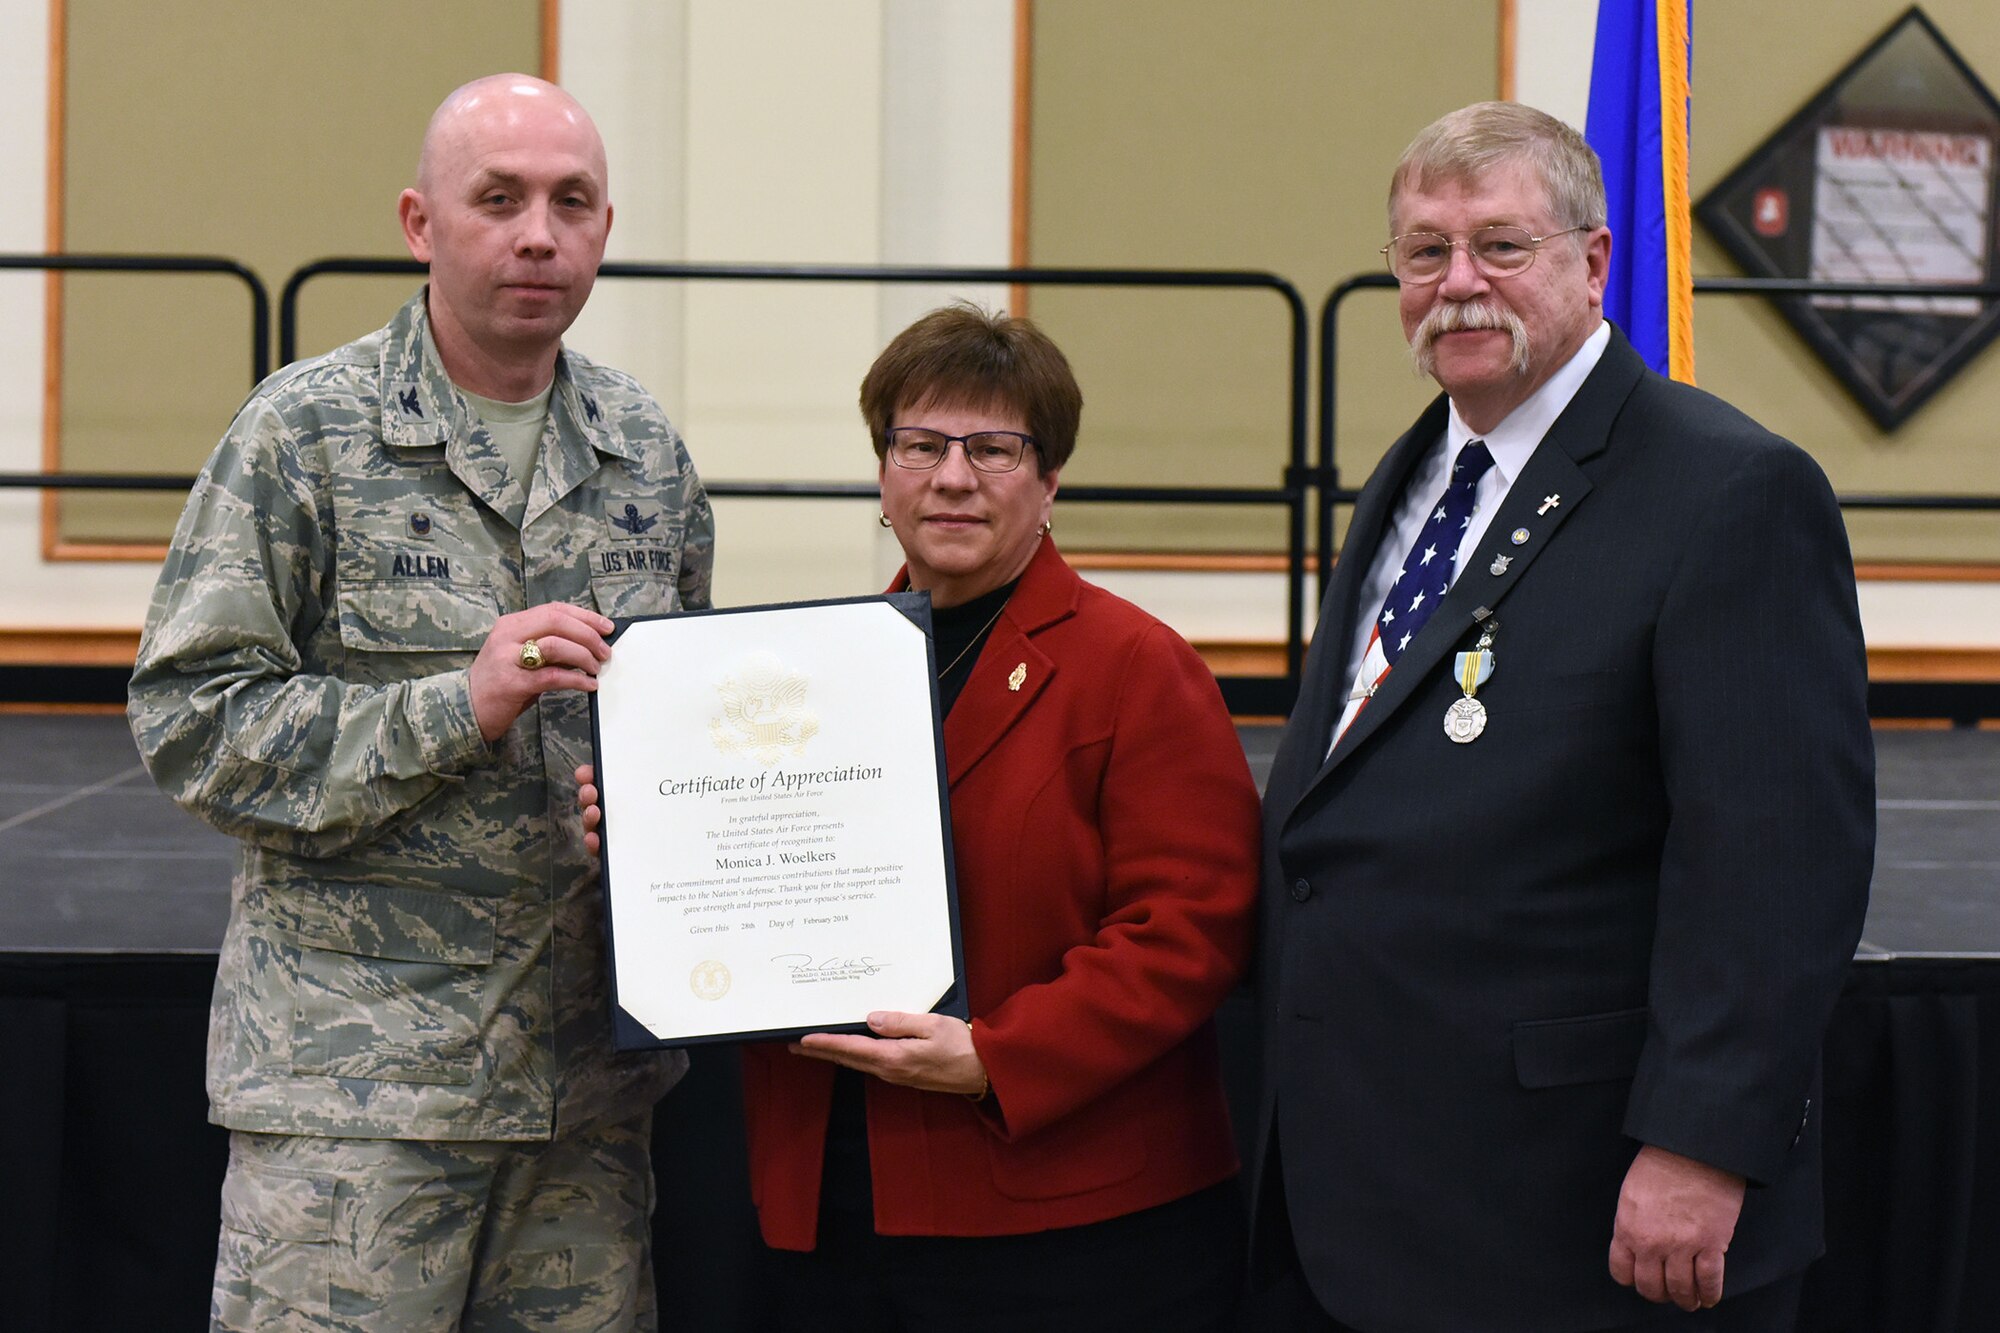 180228-F-UQ541-0657 Col. Ronald Allen, 341st Missile Wing commander, presents an award to and poses with Peter Woelkers Sr., 341st Missile Wing Weapons Safety Office chief of weapons safety/nuclear surety officer, and spouse Monica Woelkers, Feb. 28, 2018, at Malmstrom Air Force Base, Mont., during Peter’s retirement ceremony. Woelkers retired after a civilian career at Malmstrom that began in 1998. (U.S. Air Force photo by Kiersten McCutchan)